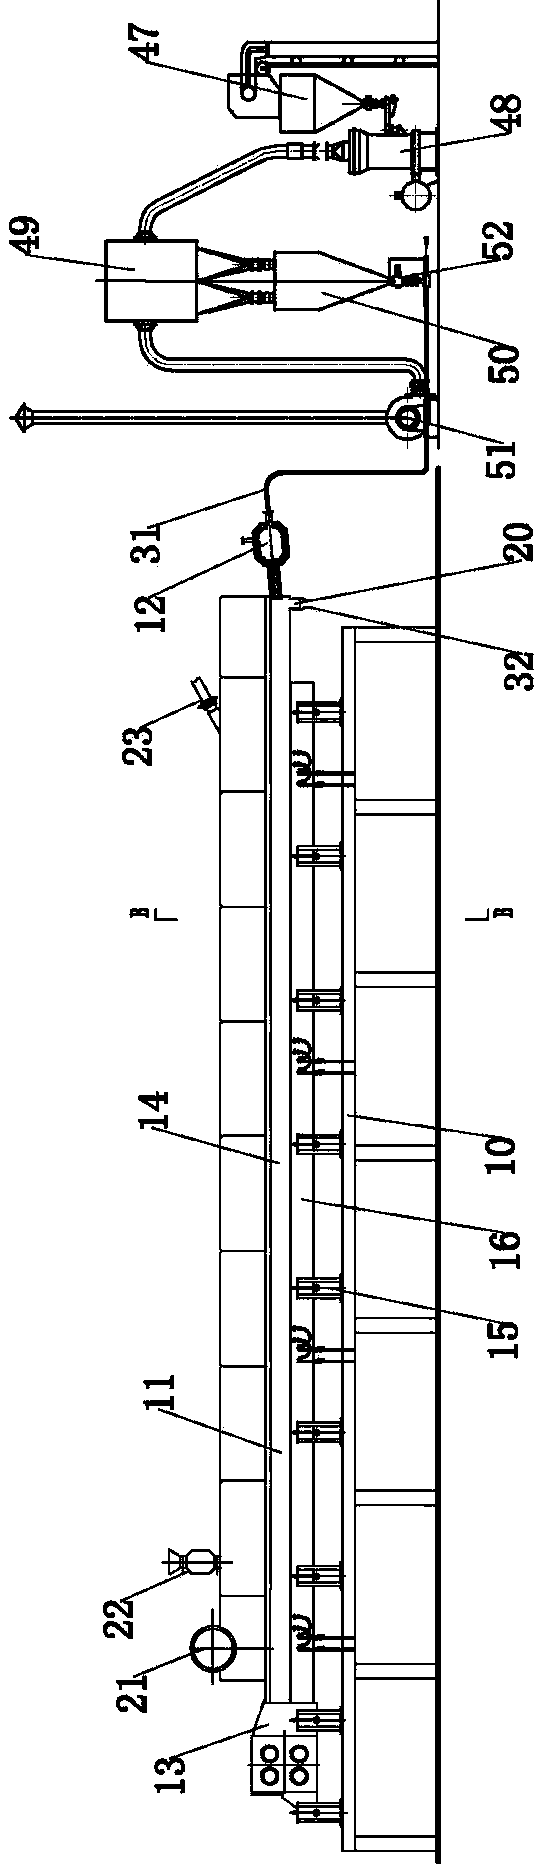 Continuous ore reduction and hot-charging steelmaking device